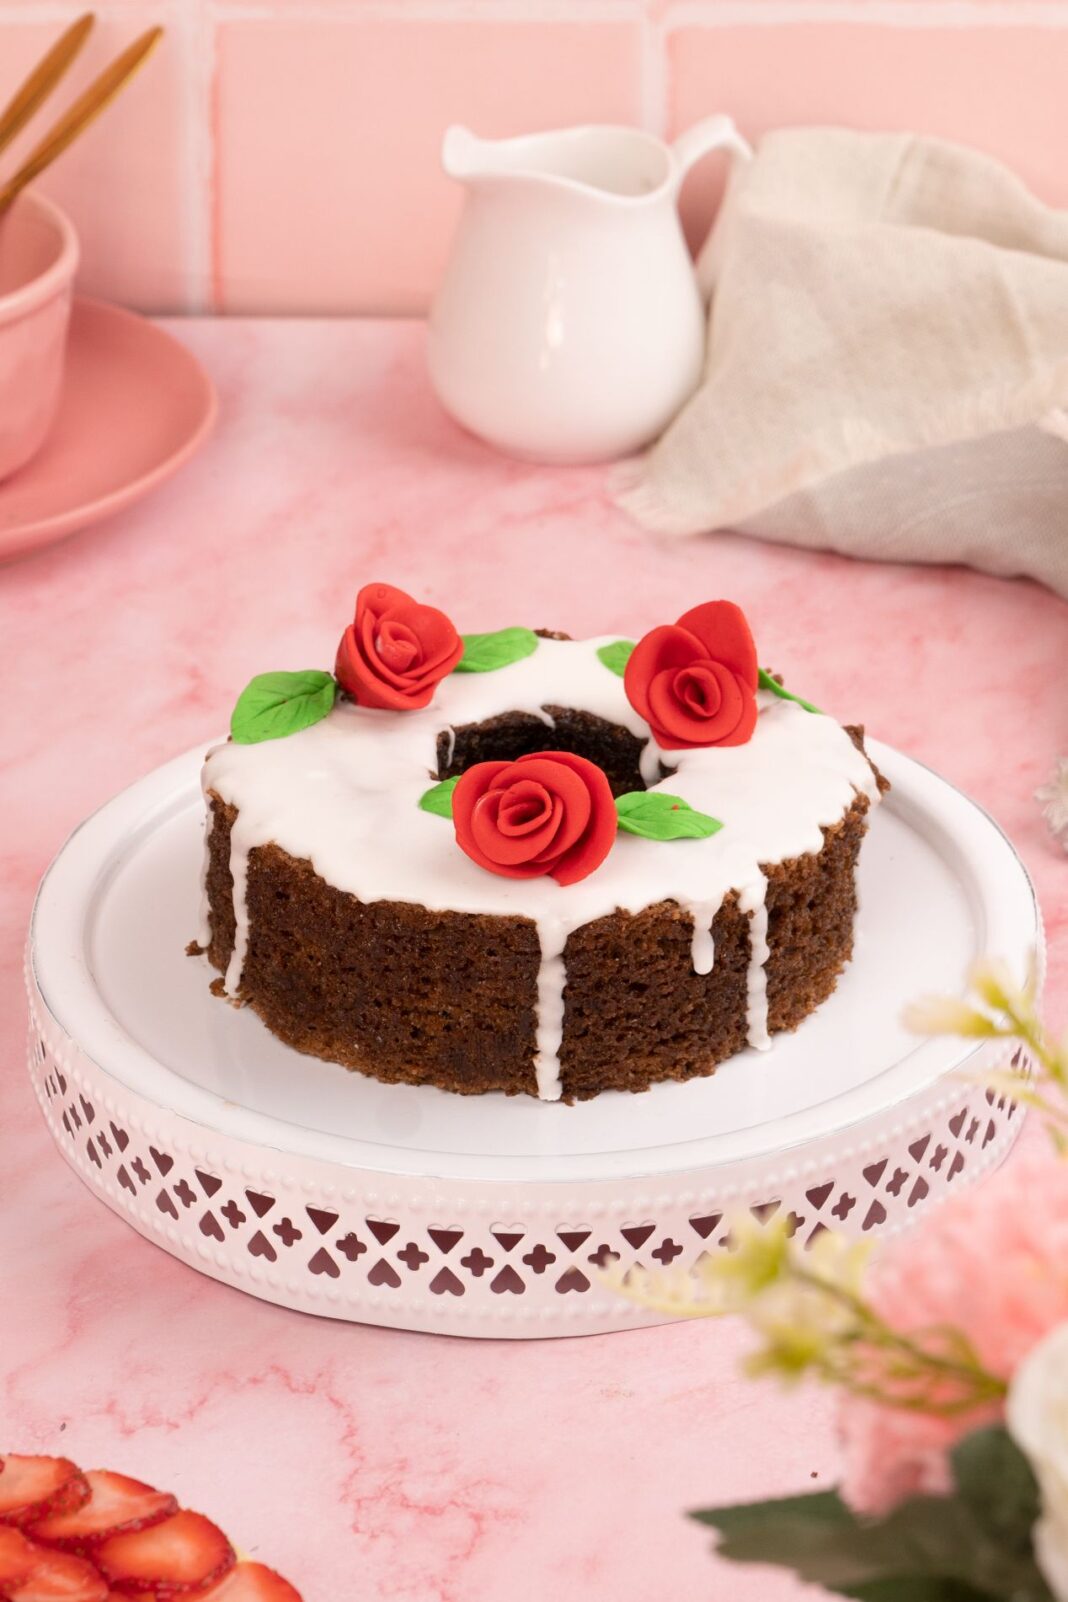 5 Best Bakeries to Order Delicious Cakes in Gurgaon